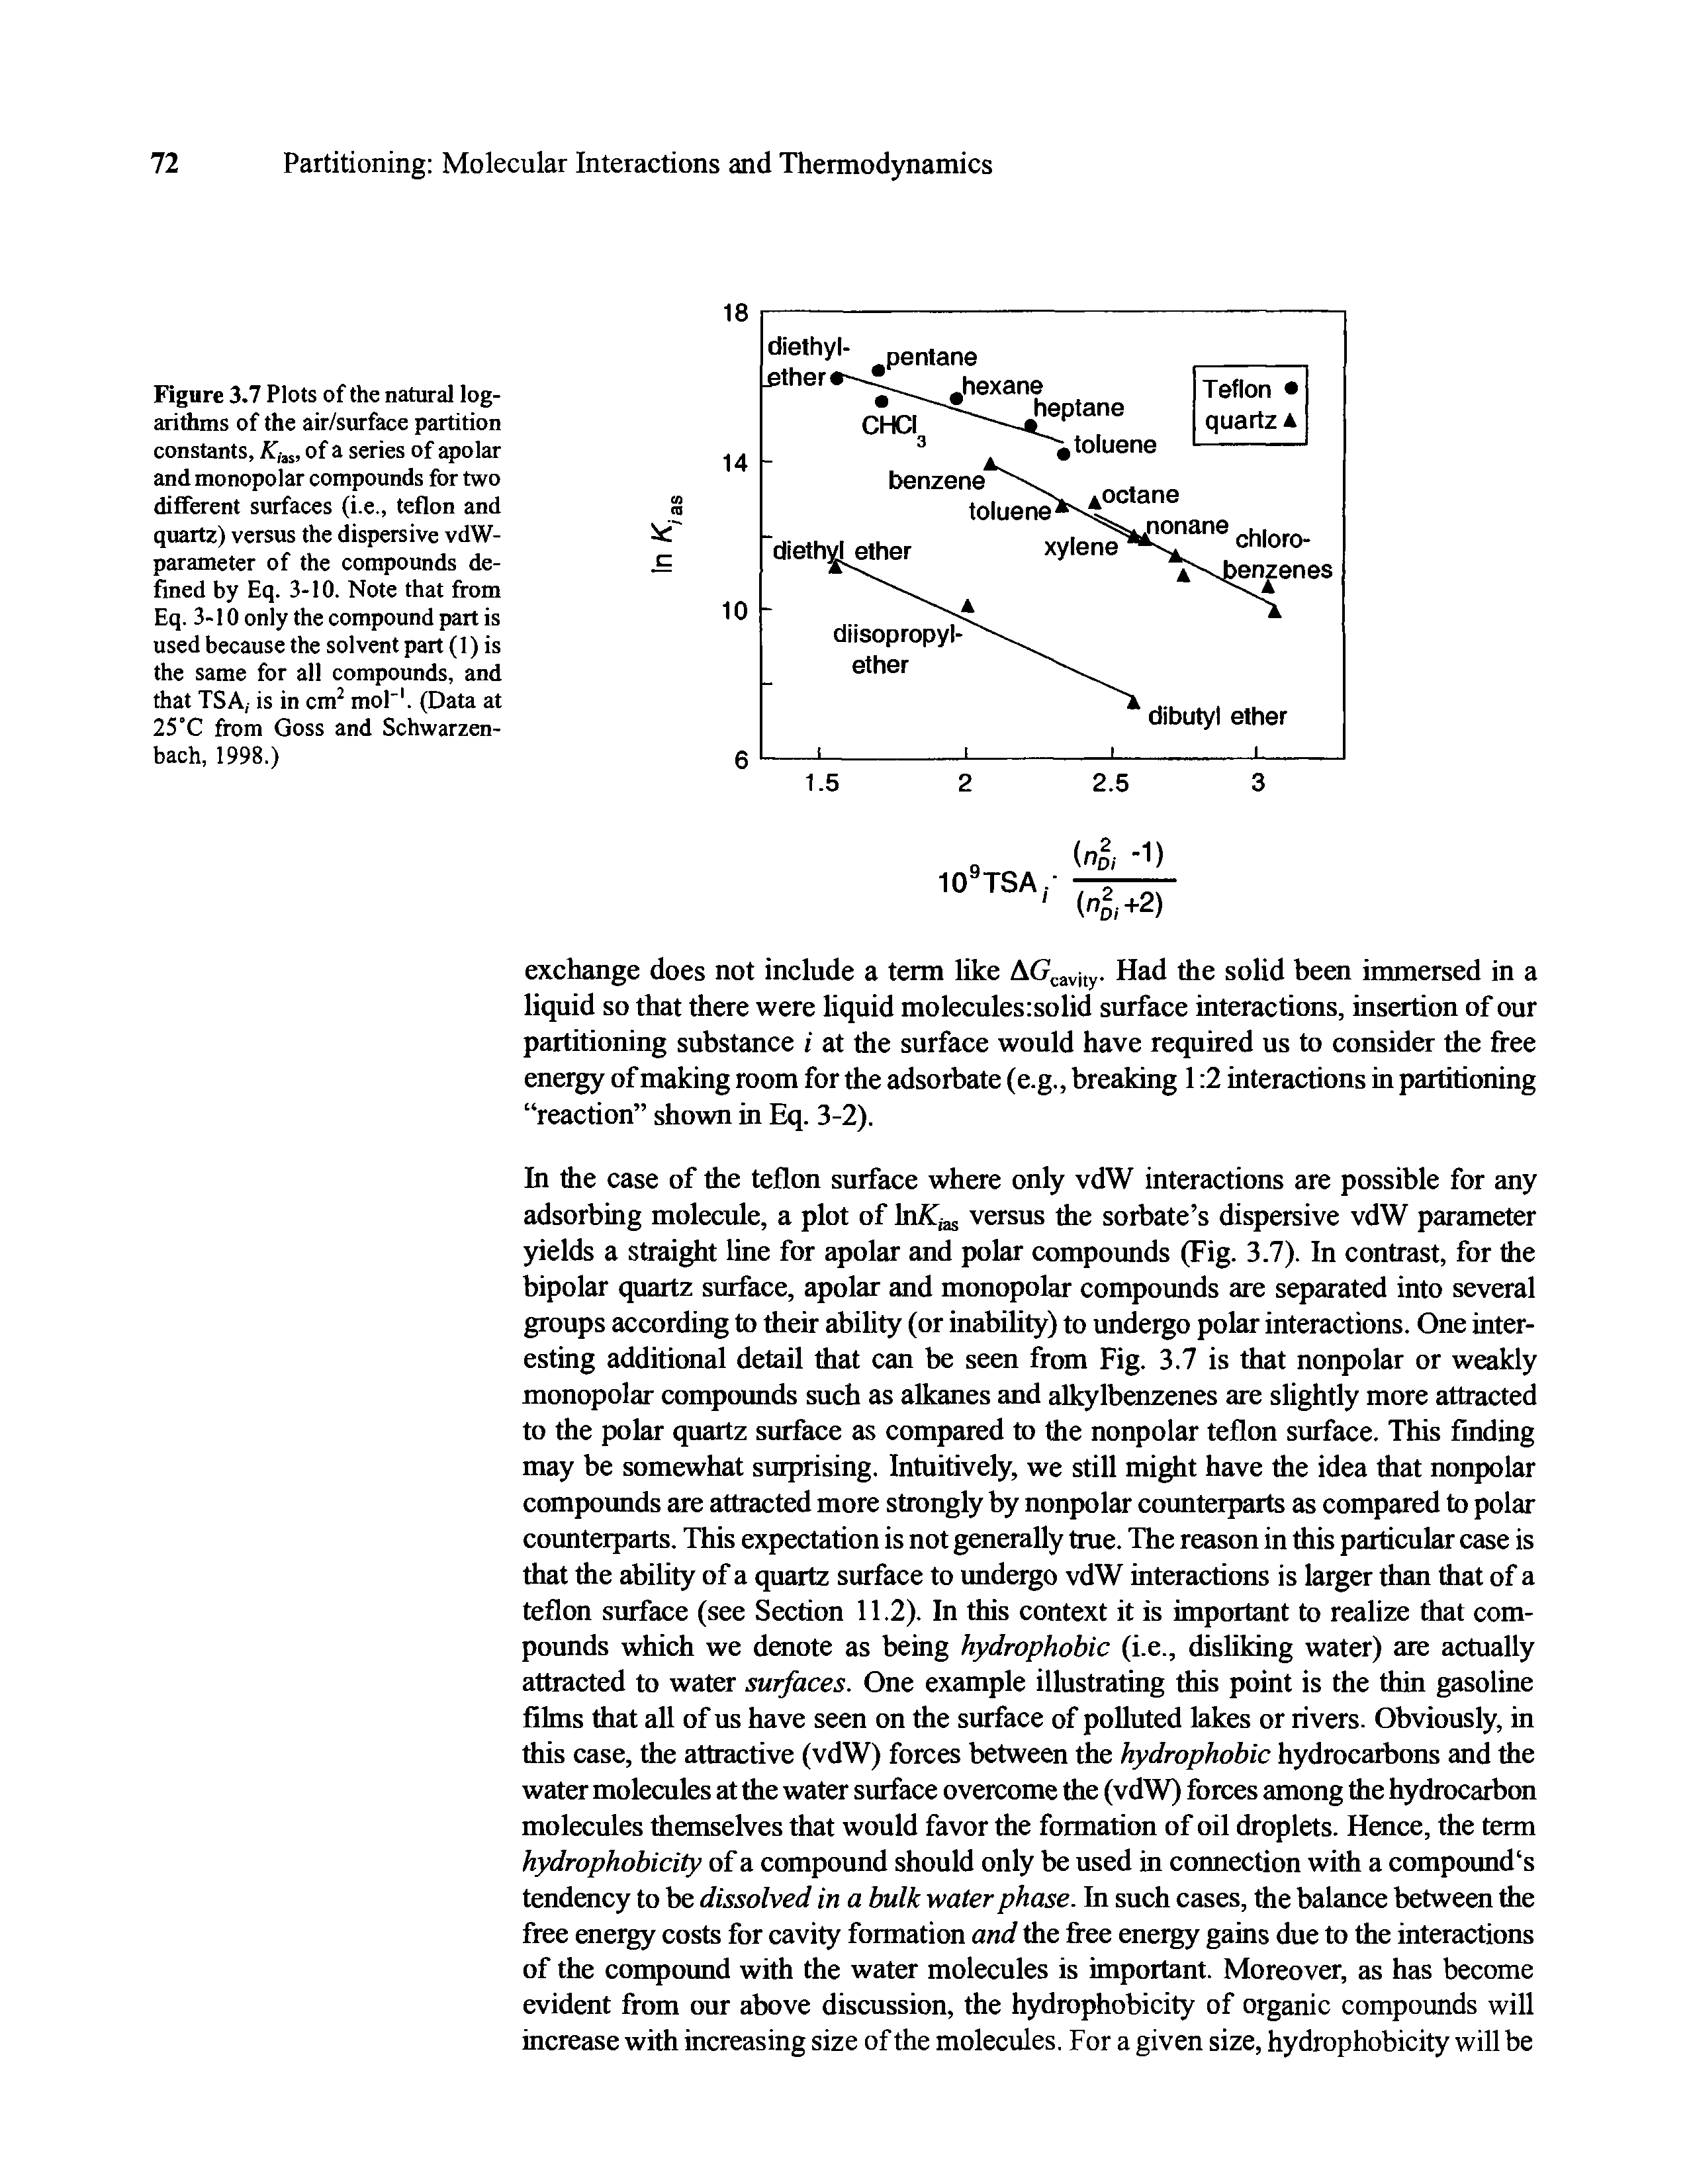 Figure 3.7 Plots of the natural logarithms of the air/surface partition constants, Kias, of a series of apolar and monopolar compounds for two different surfaces (i.e., teflon and quartz) versus the dispersive vdW-parameter of the compounds defined by Eq. 3-10. Note that from Eq. 3-10 only the compound part is used because the solvent part (1) is the same for all compounds, and that TSA, is in cm2 mol"1. (Data at 25 "C from Goss and Schwarzen-bach, 1998.)...